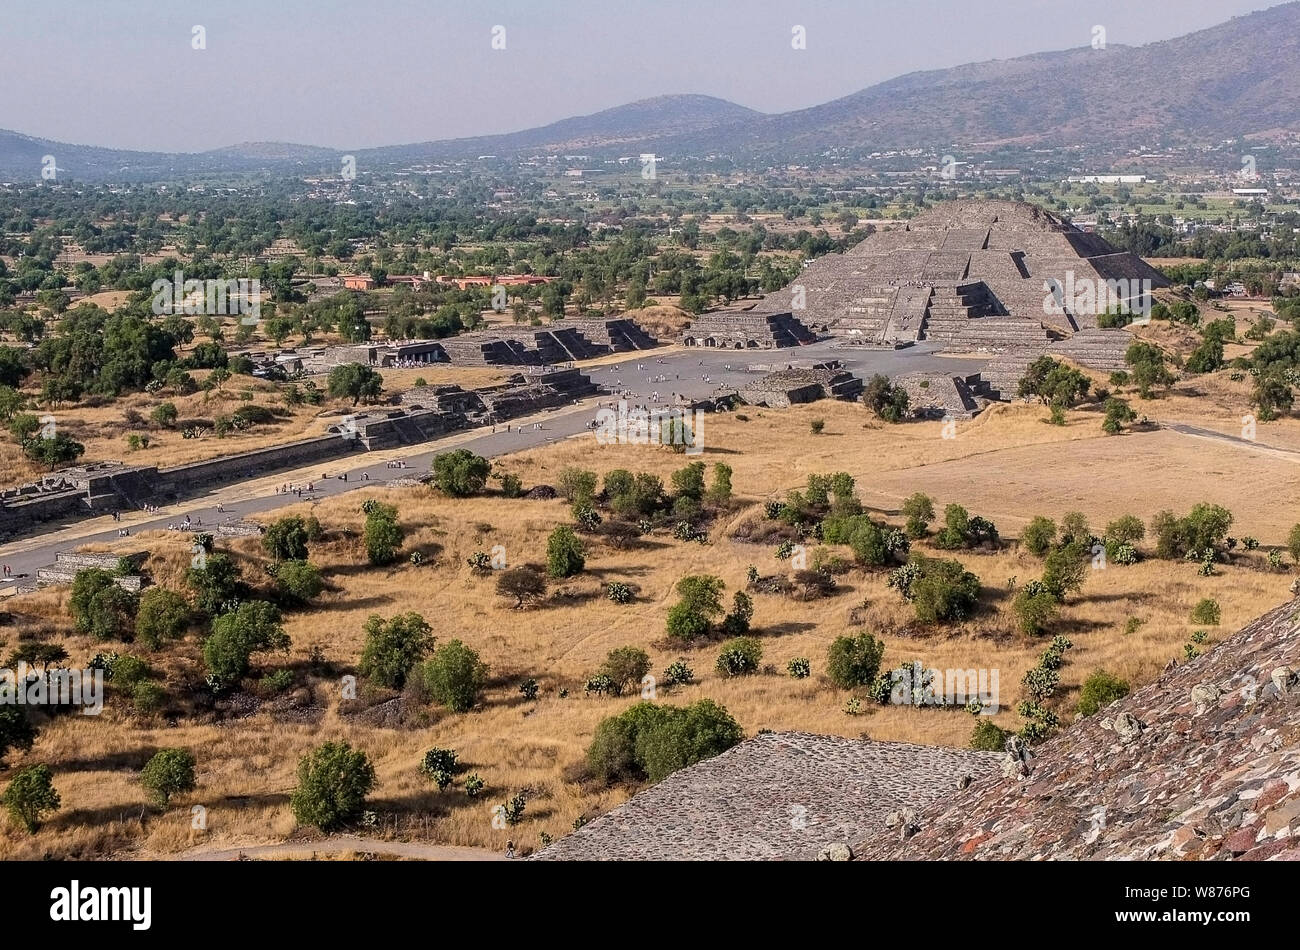 Teotihuacan, was a pre-Columbian Mesoamerican city located in the Basin of Mexico, 30 miles (48 km) northeast of modern day Mexico City, which is today known as the site of many of the most architecturally significant Mesoamerican pyramids built in the pre-Columbian Americas. Apart from the pyramids, Teotihuacan is also anthropologically significant for its complex, multi-family residential compounds, the Avenue of the Dead, and the small portion of its vibrant murals that have been exceptionally well-preserved. Additionally, Teotihuacan produced a thin orange pottery style that spread through Stock Photo